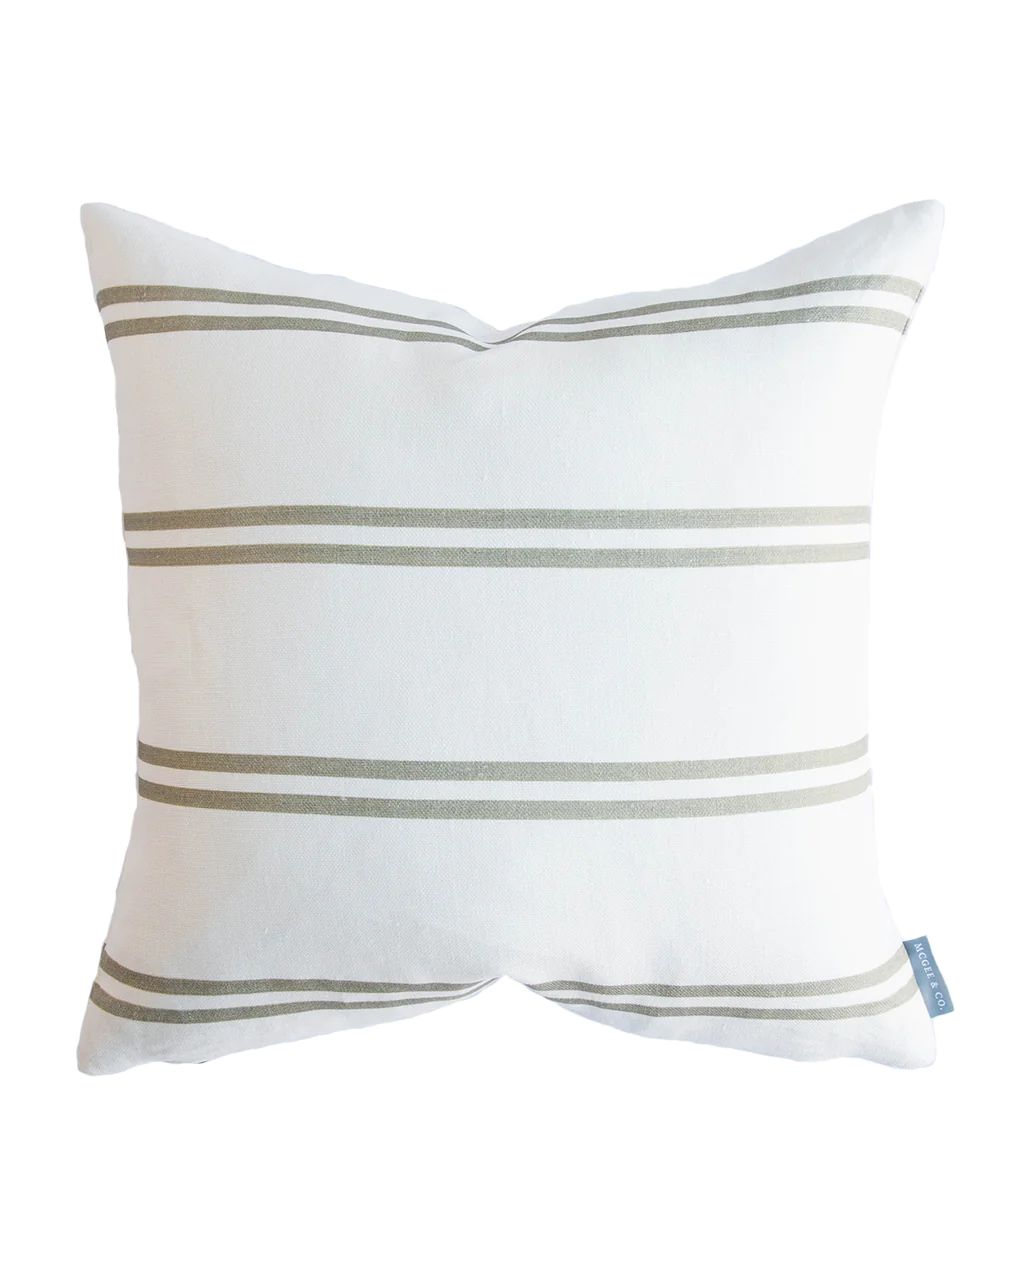 Franklin Olive Stripe Pillow Cover | McGee & Co.